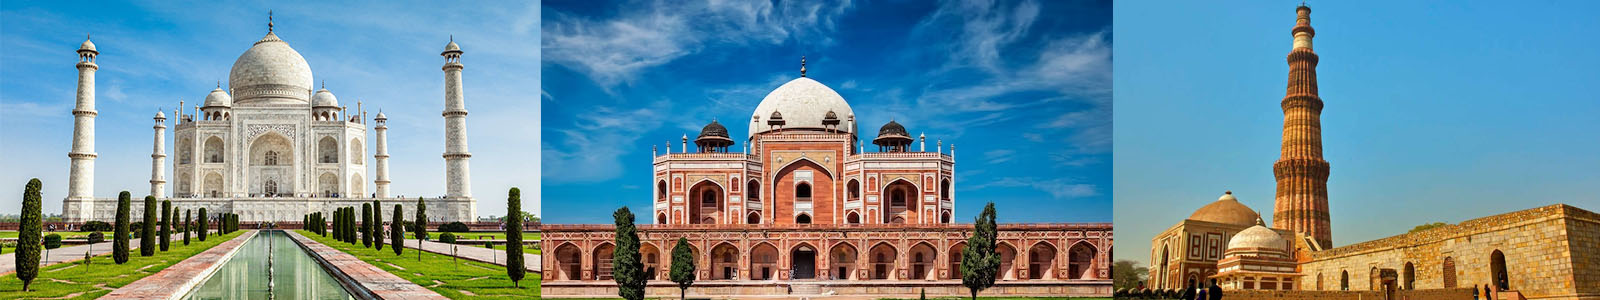 Agra Taj Mahal Private Day Tour From Delhi or NCR